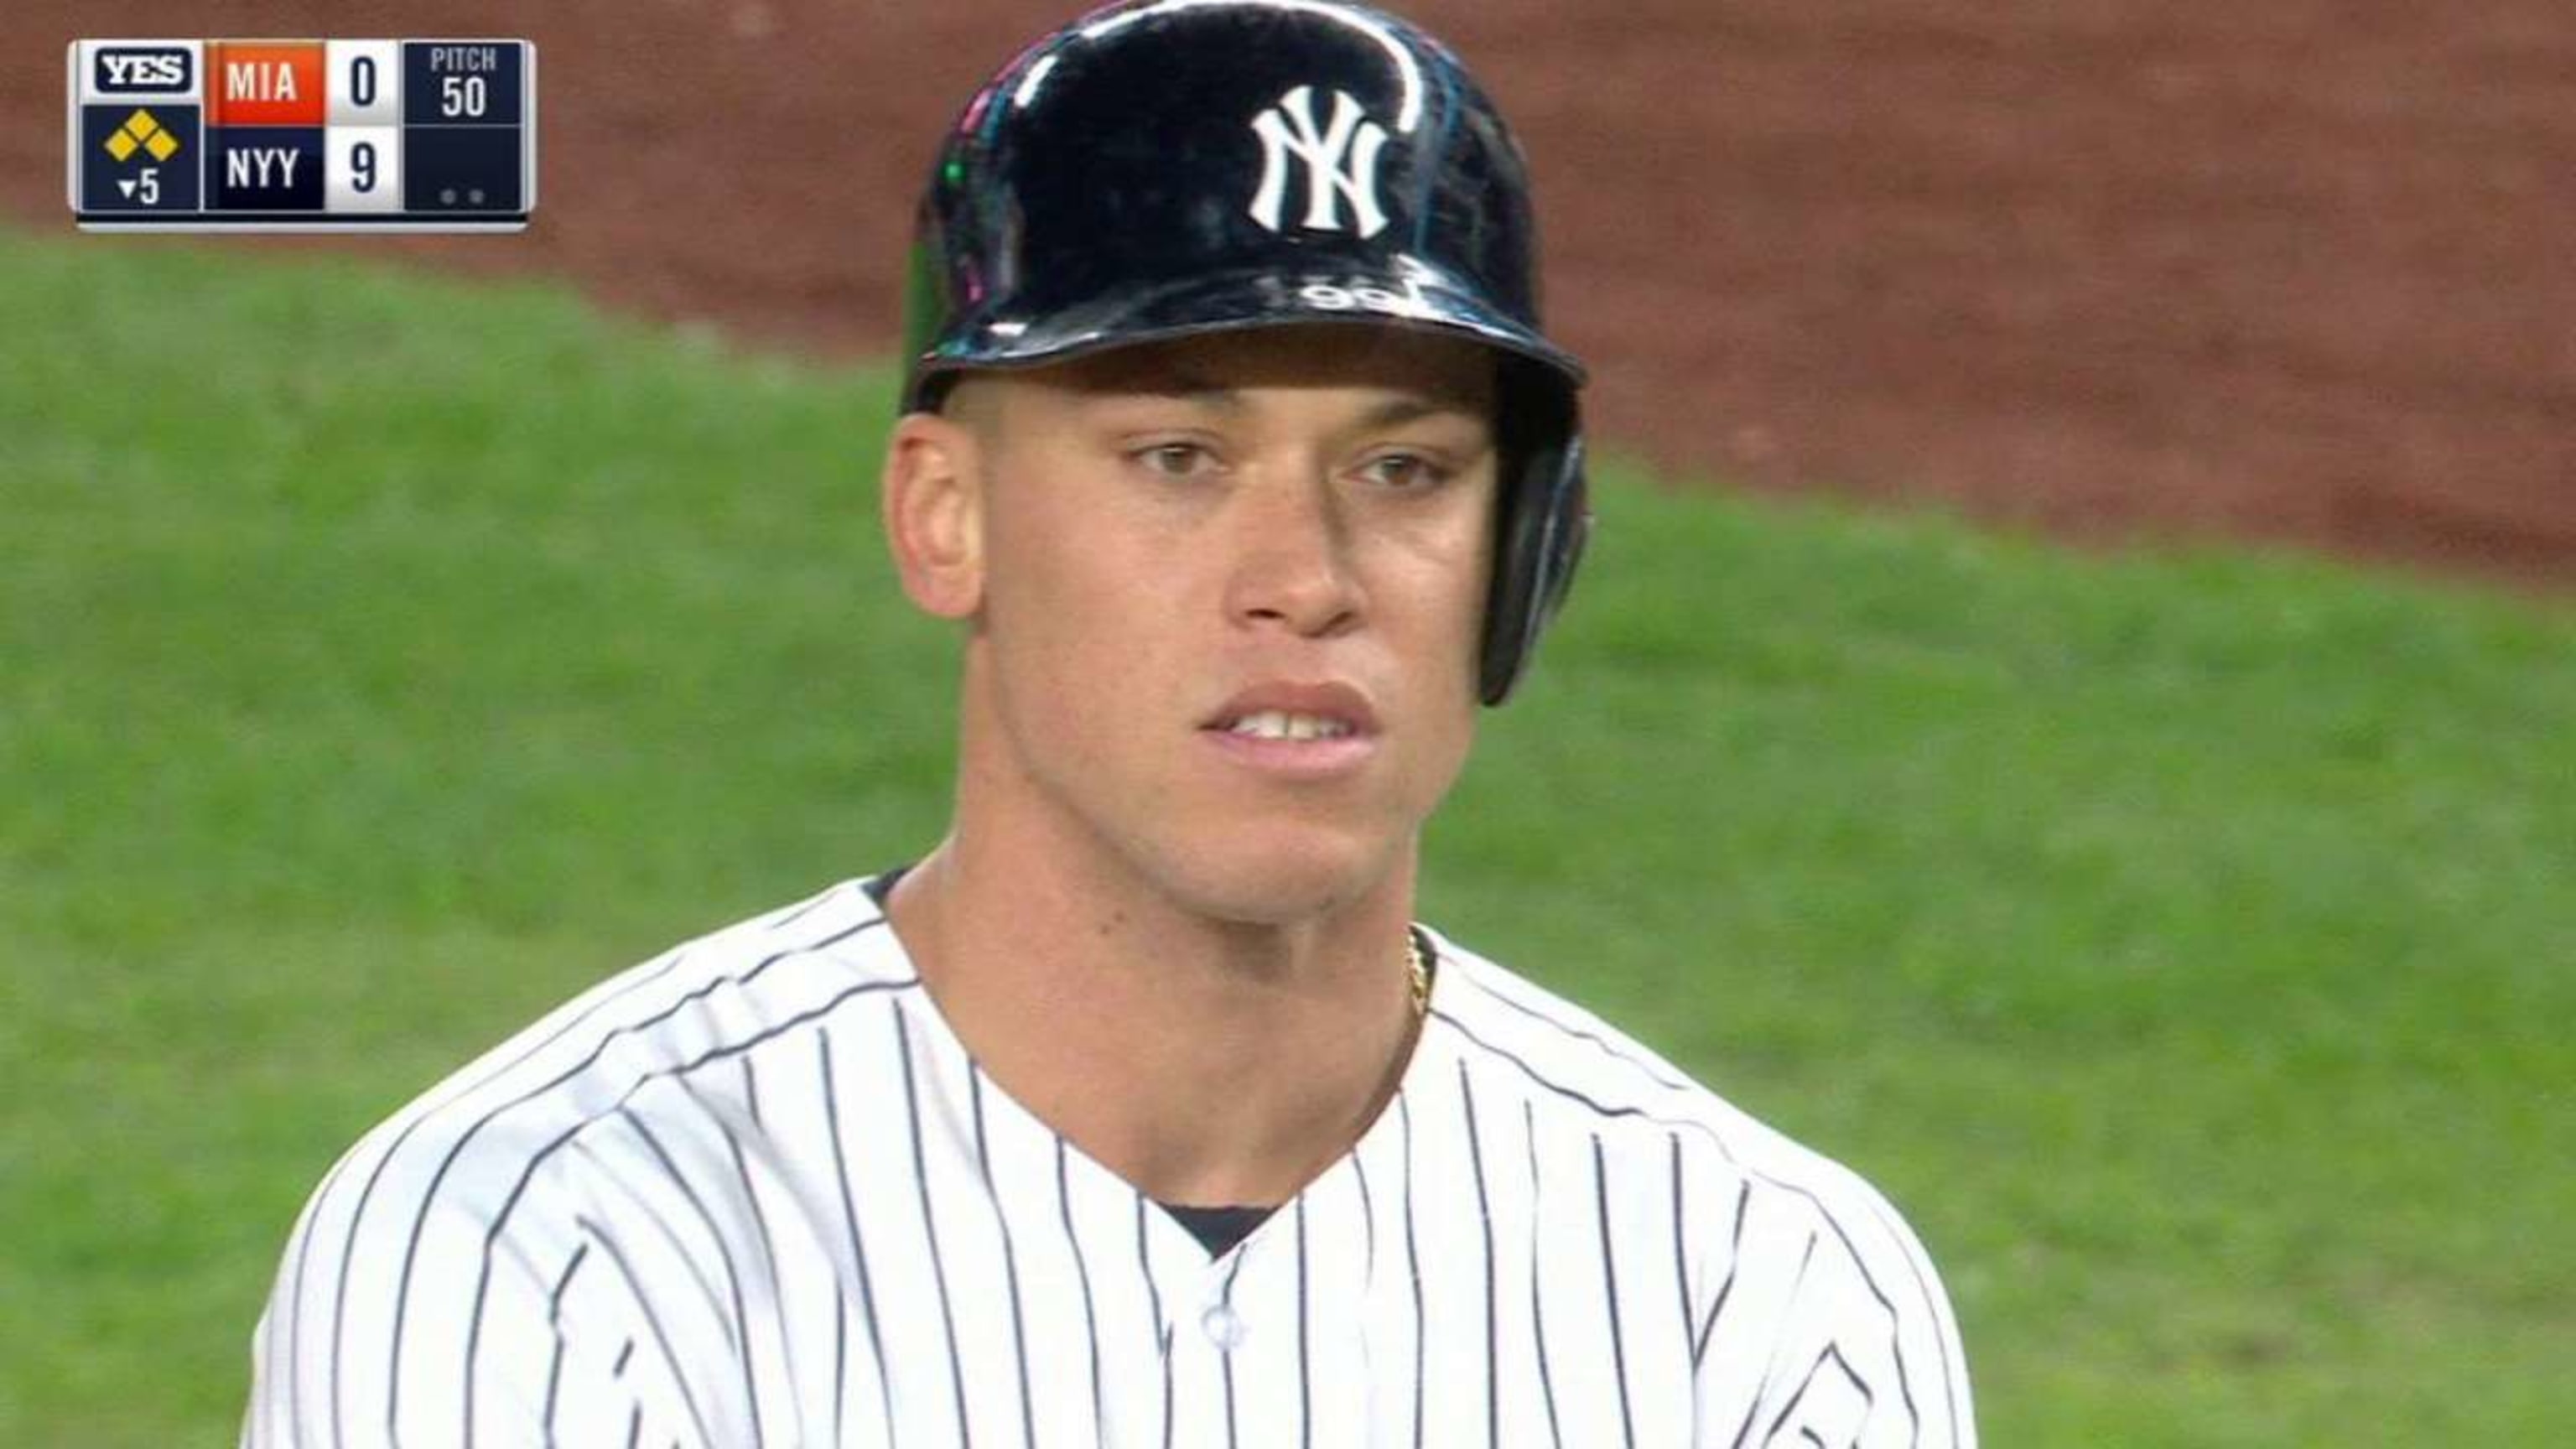 Aaron Judge sets record by being fastest to 70 career home runs